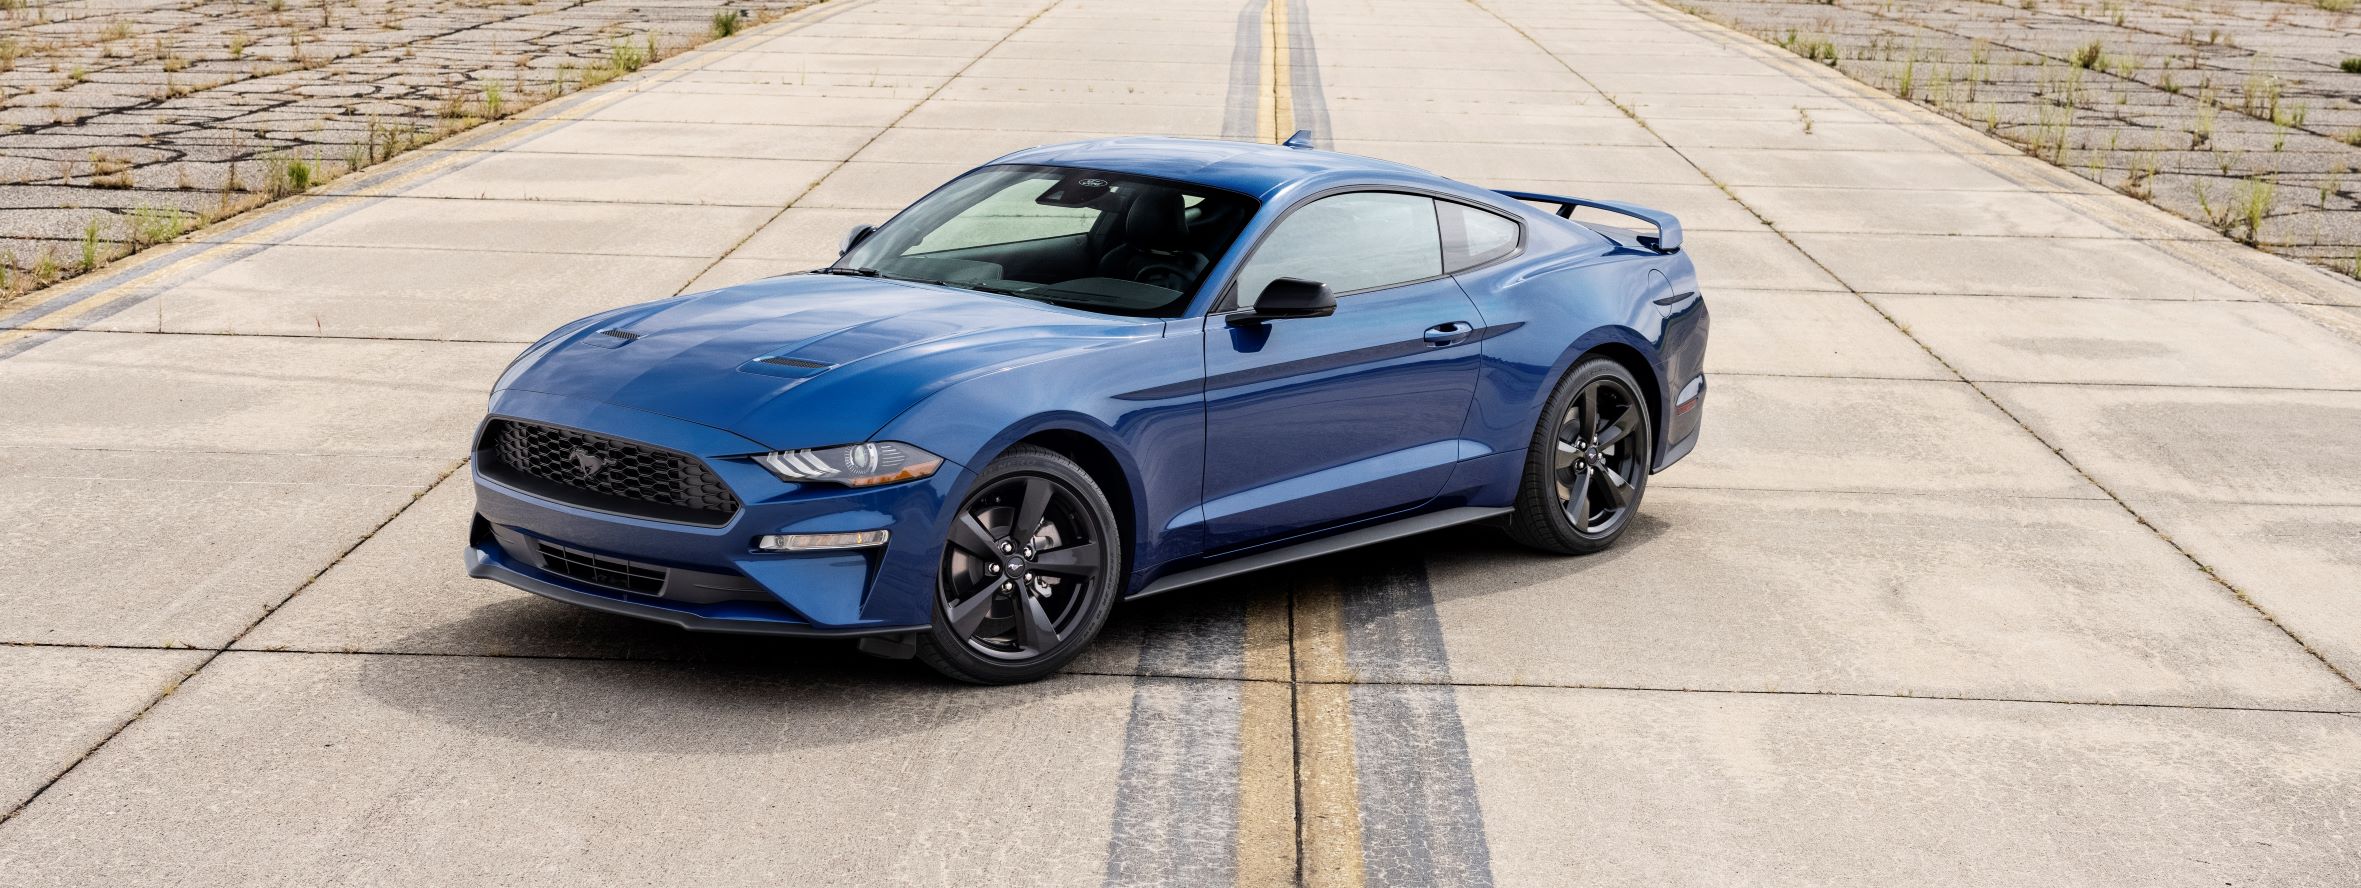 New 2022 Ford Mustang Stealth Edition